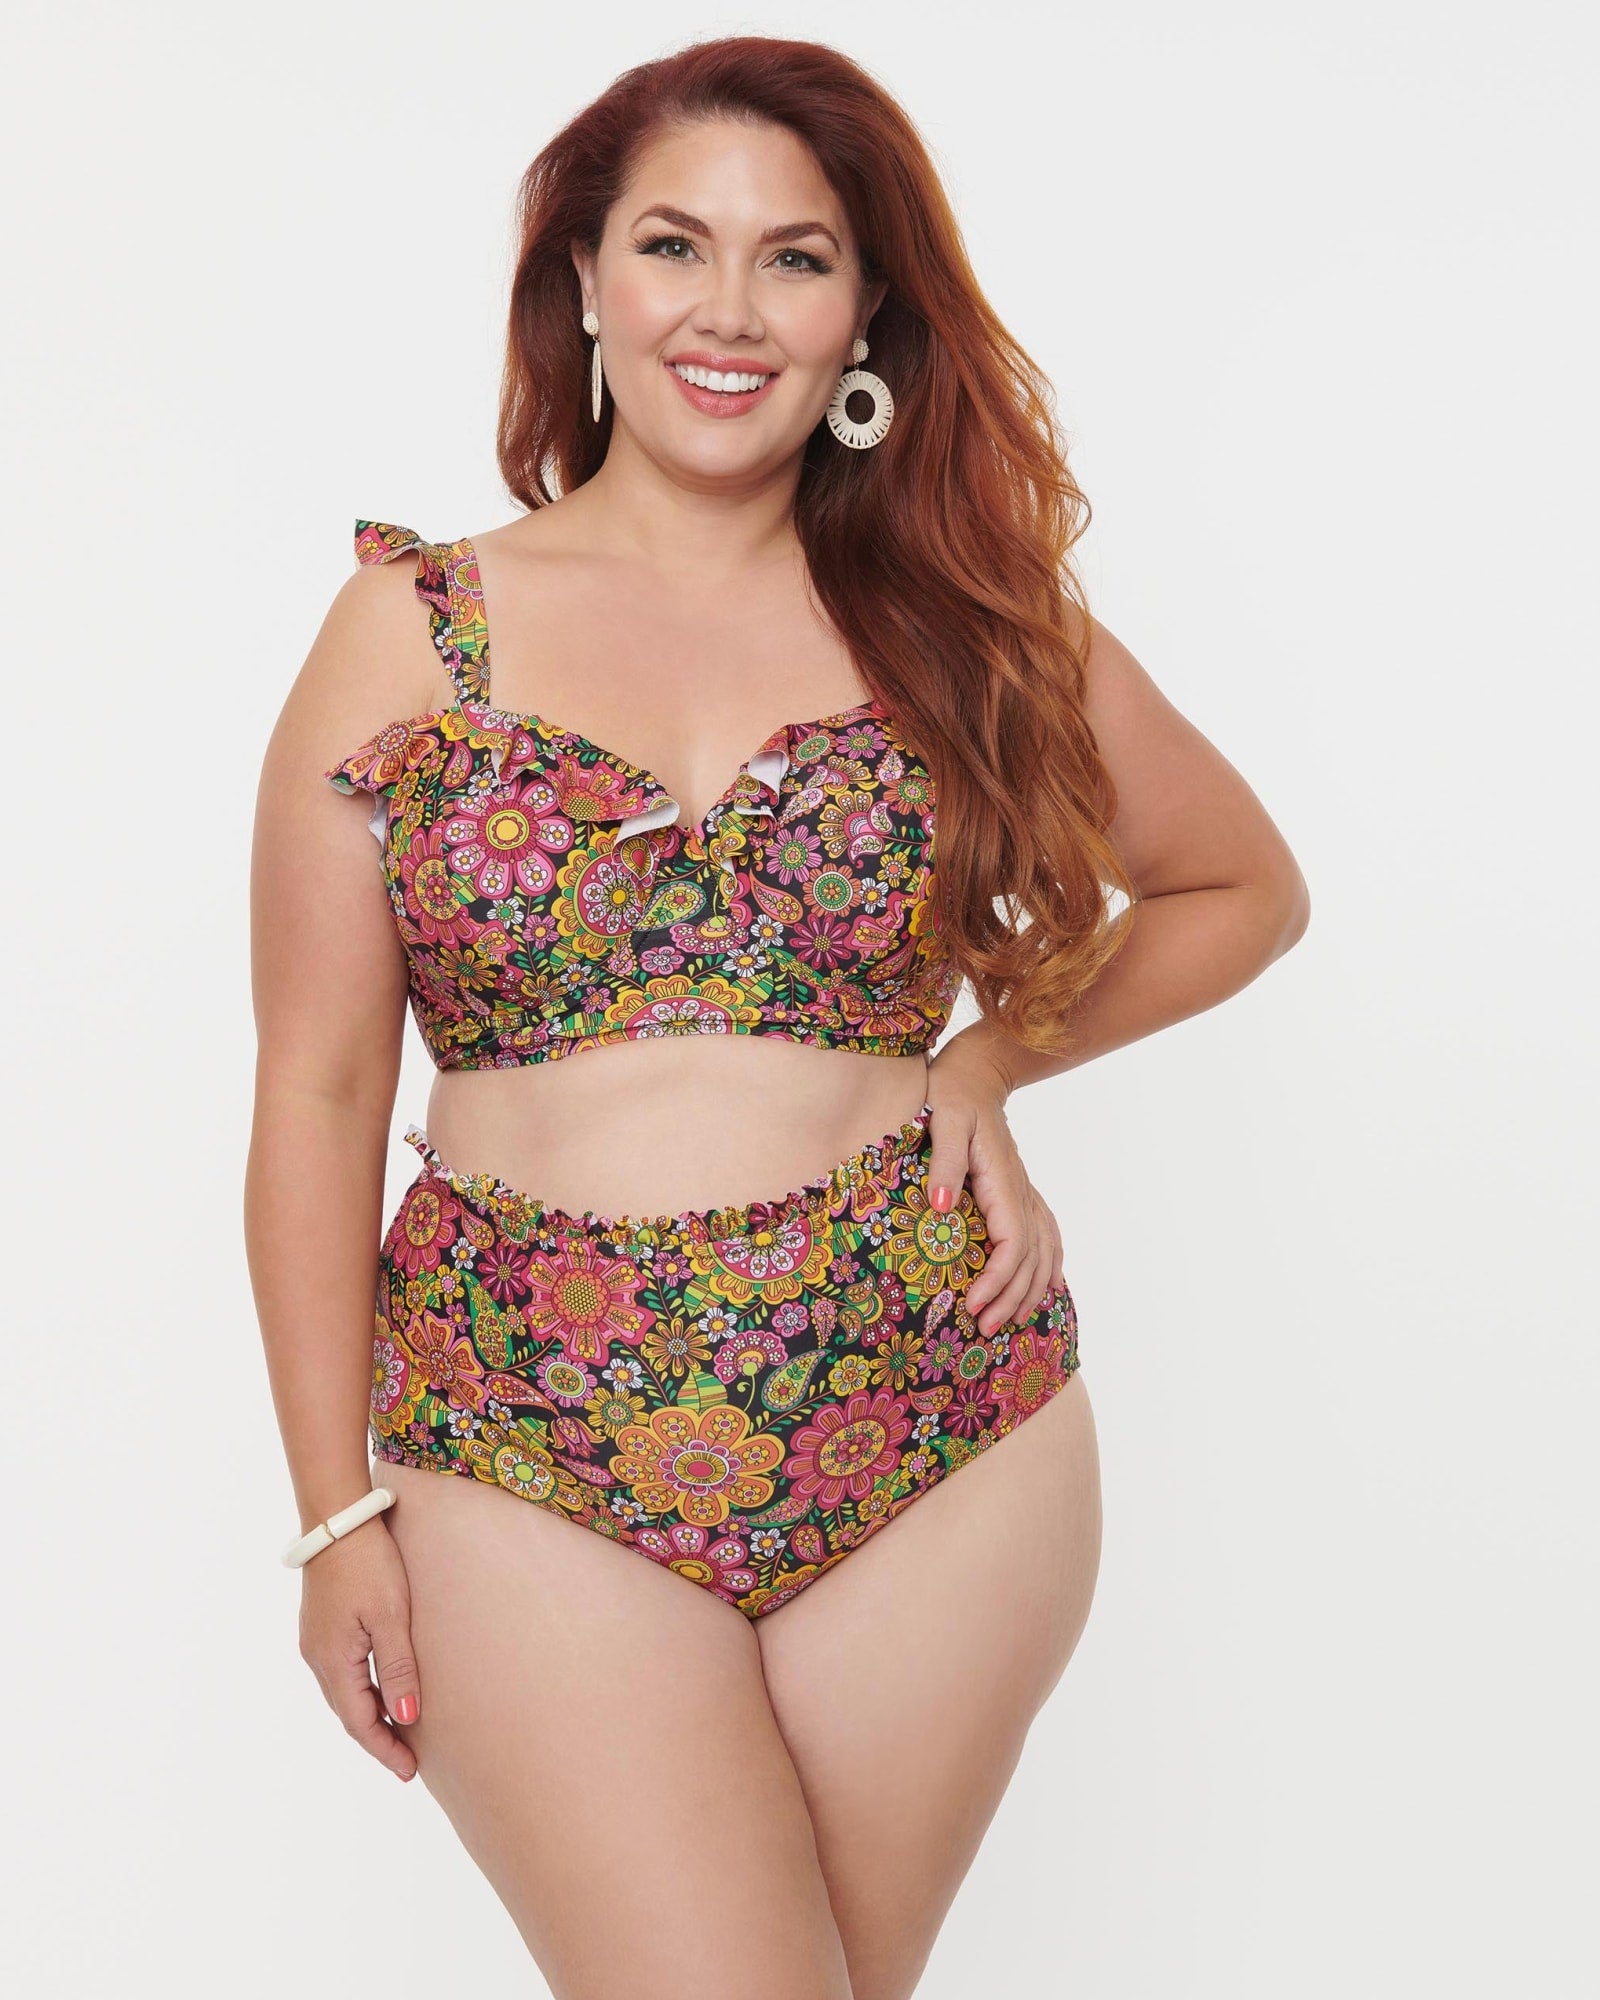 European High Waisted Womens Plus Size Swimsuits With Padded Chest Stripes  And Slim Belly Design For Beach And Pool From Dahuangtao, $23.51